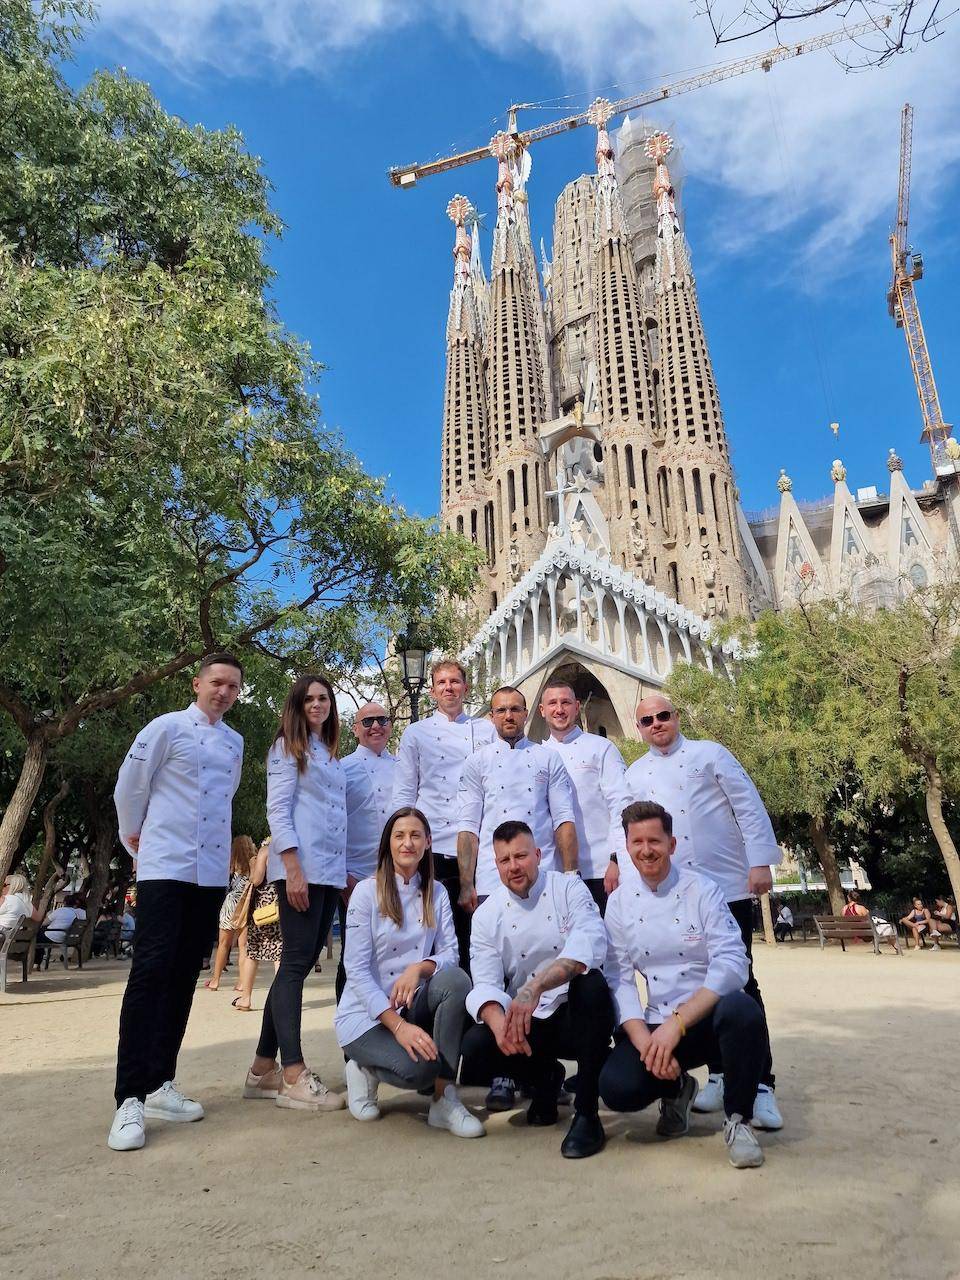 Chefs and Ambassadors from Chocolate Academy™ Poland pose for a group photo in front of a Cathedral in Barcelona